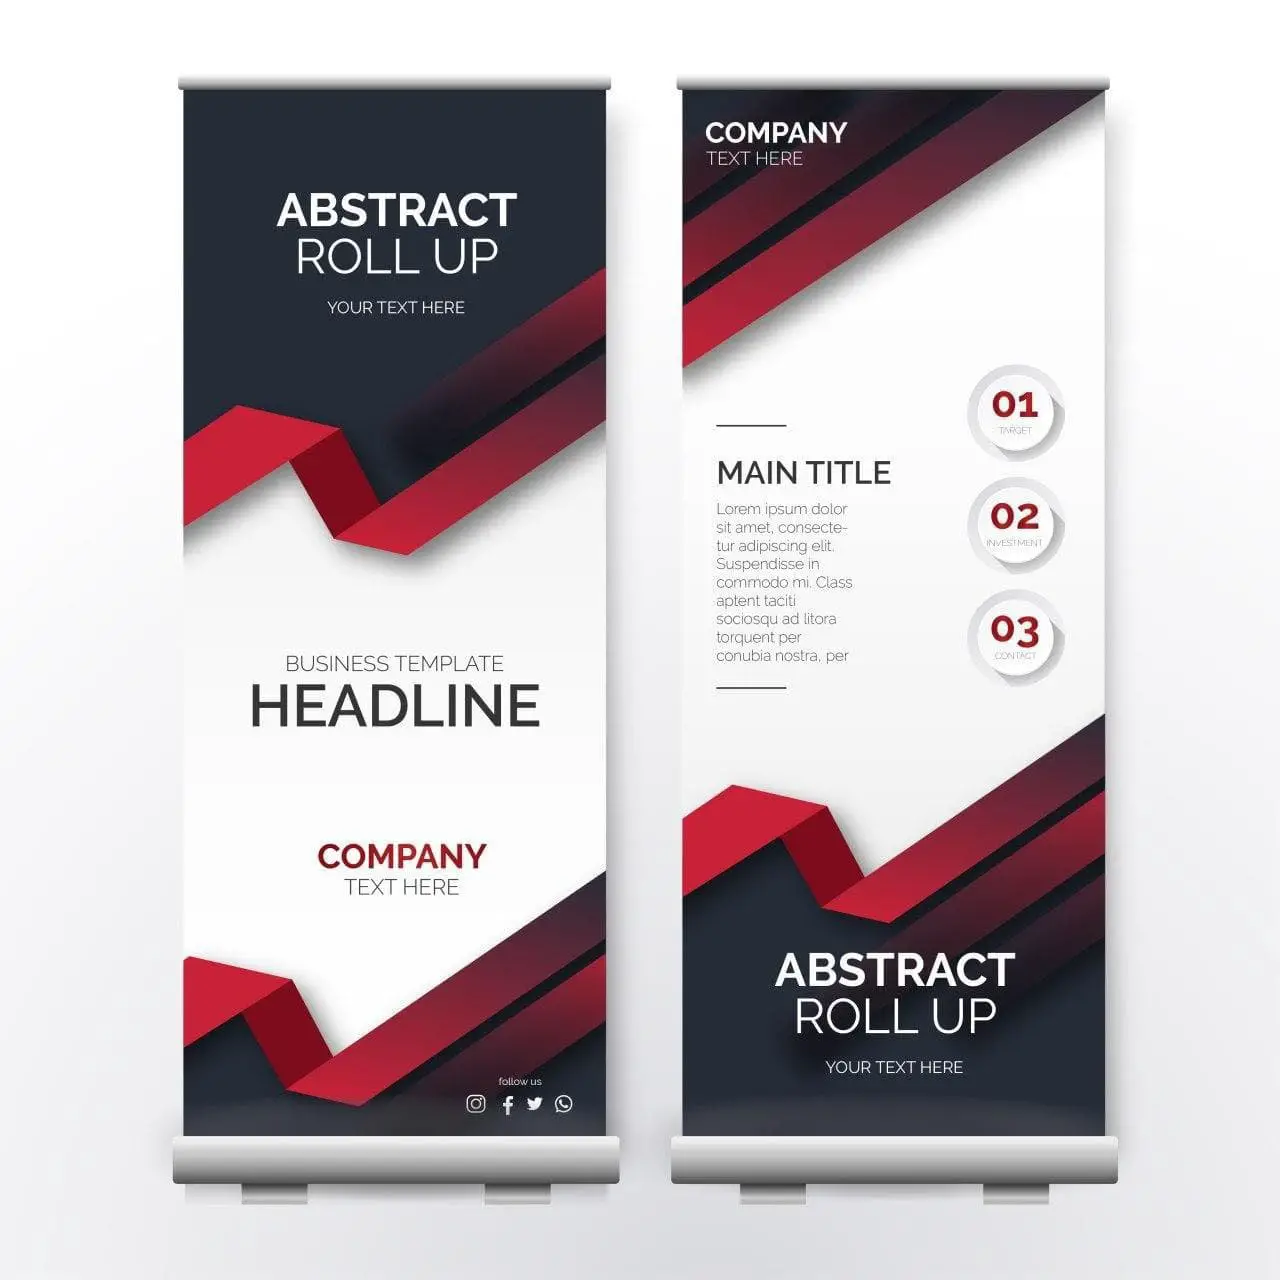 Abstract Roll Up Template with Red Shapes